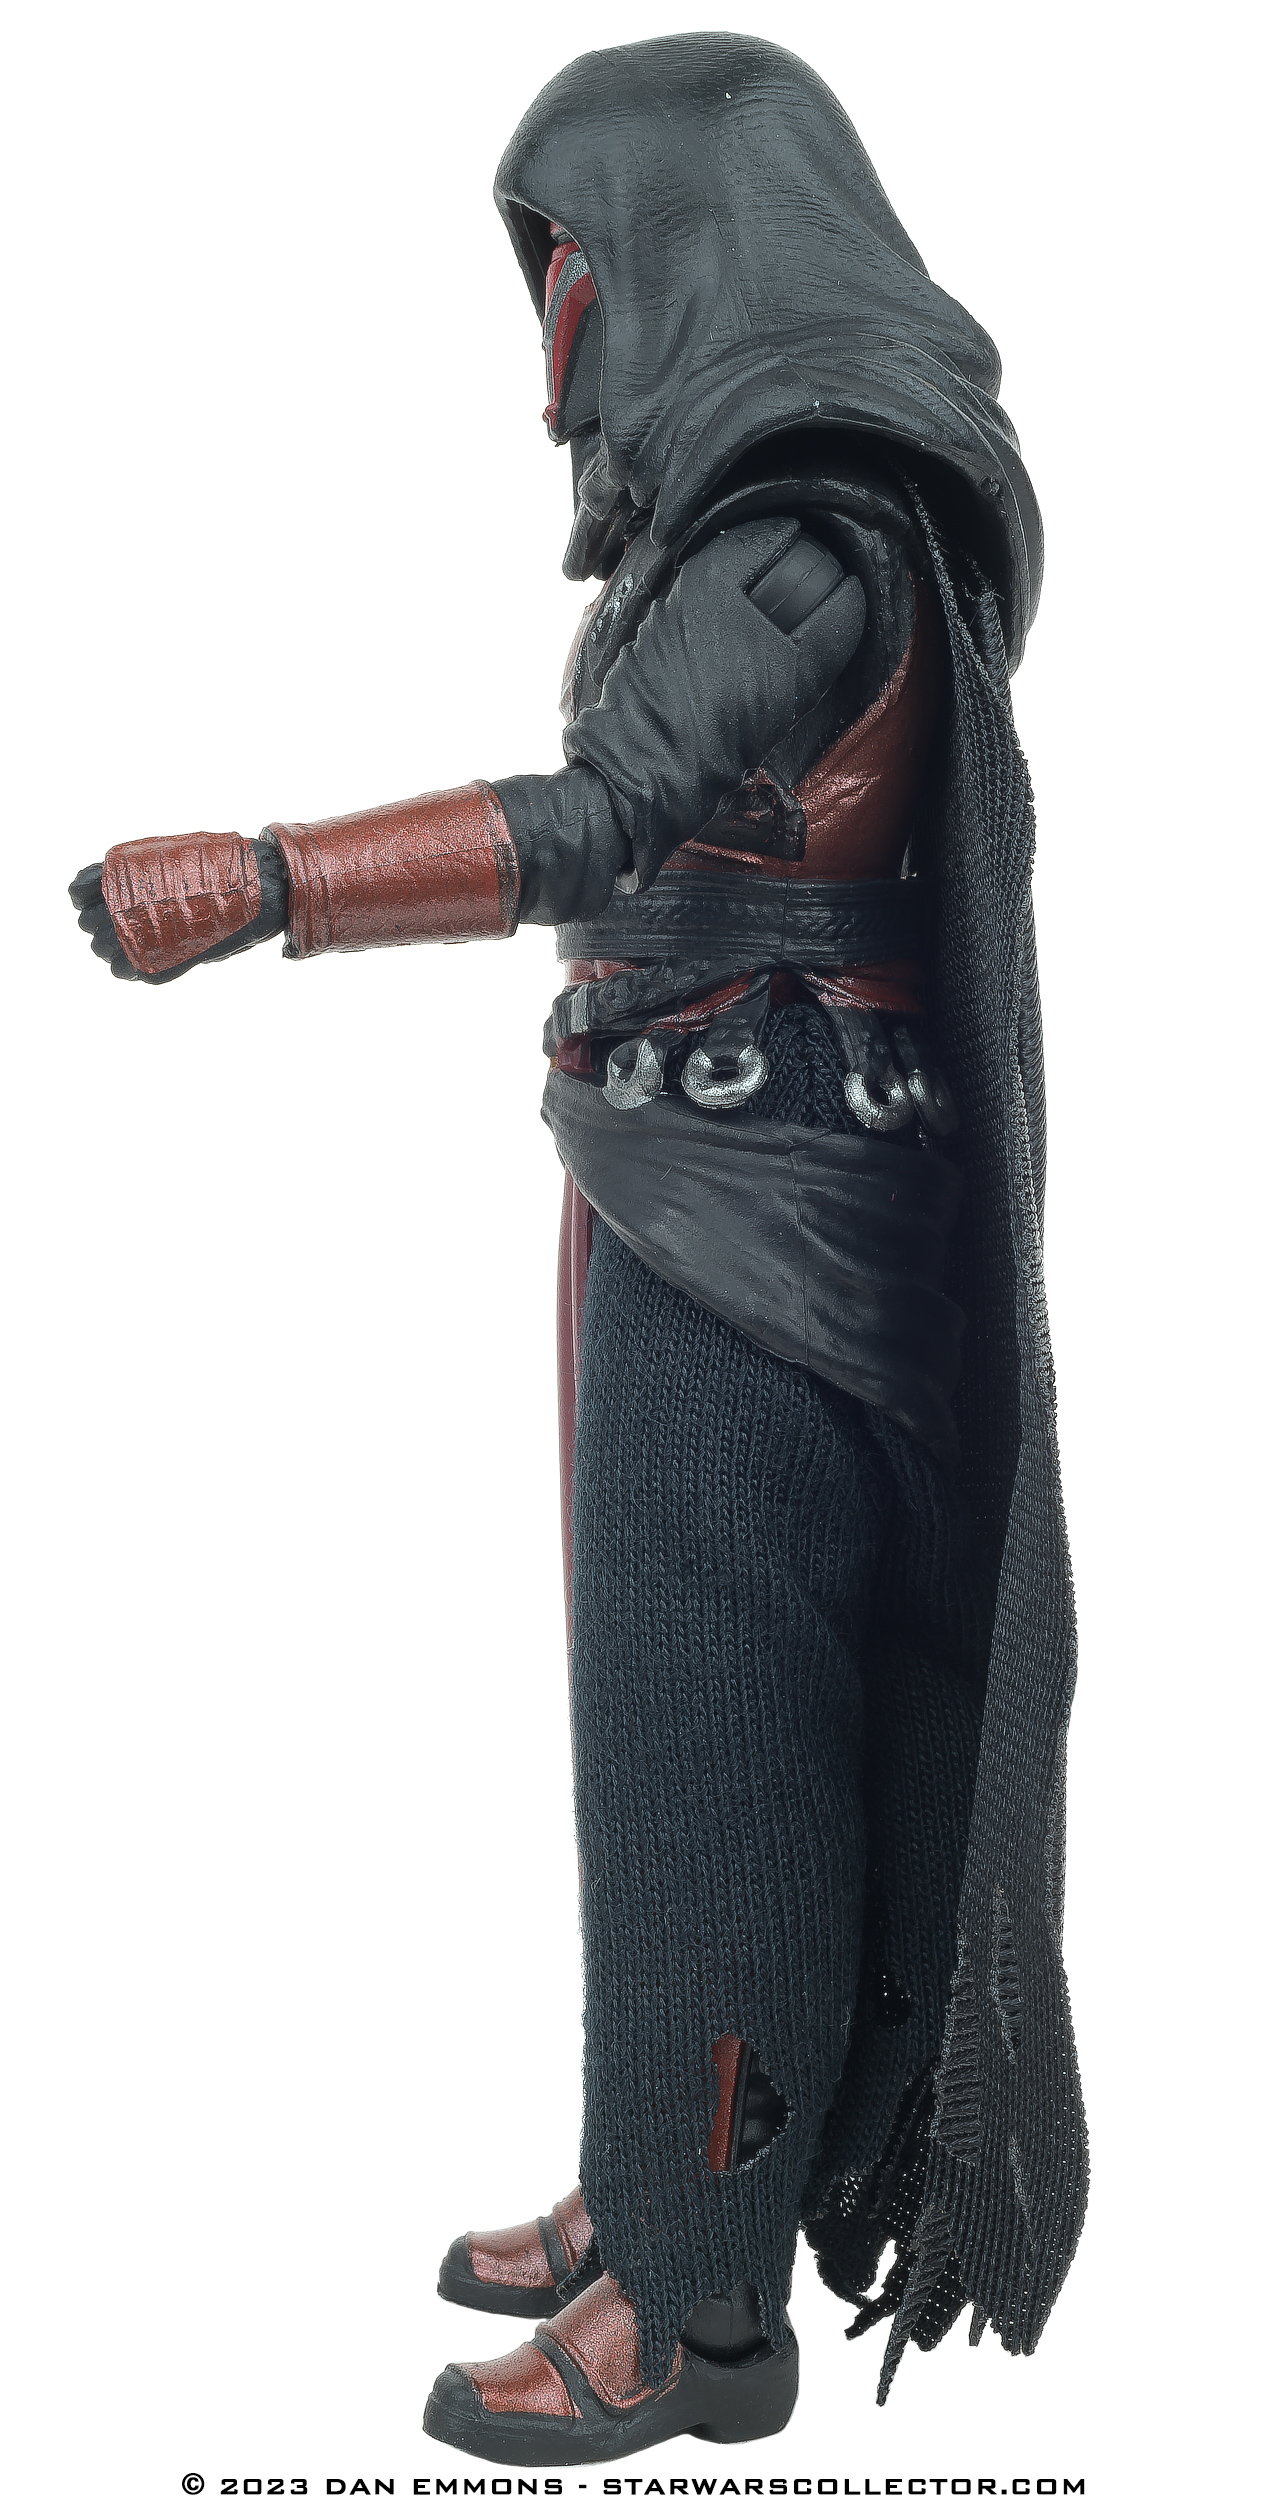 The Vintage Collection - VC301: Darth Revan